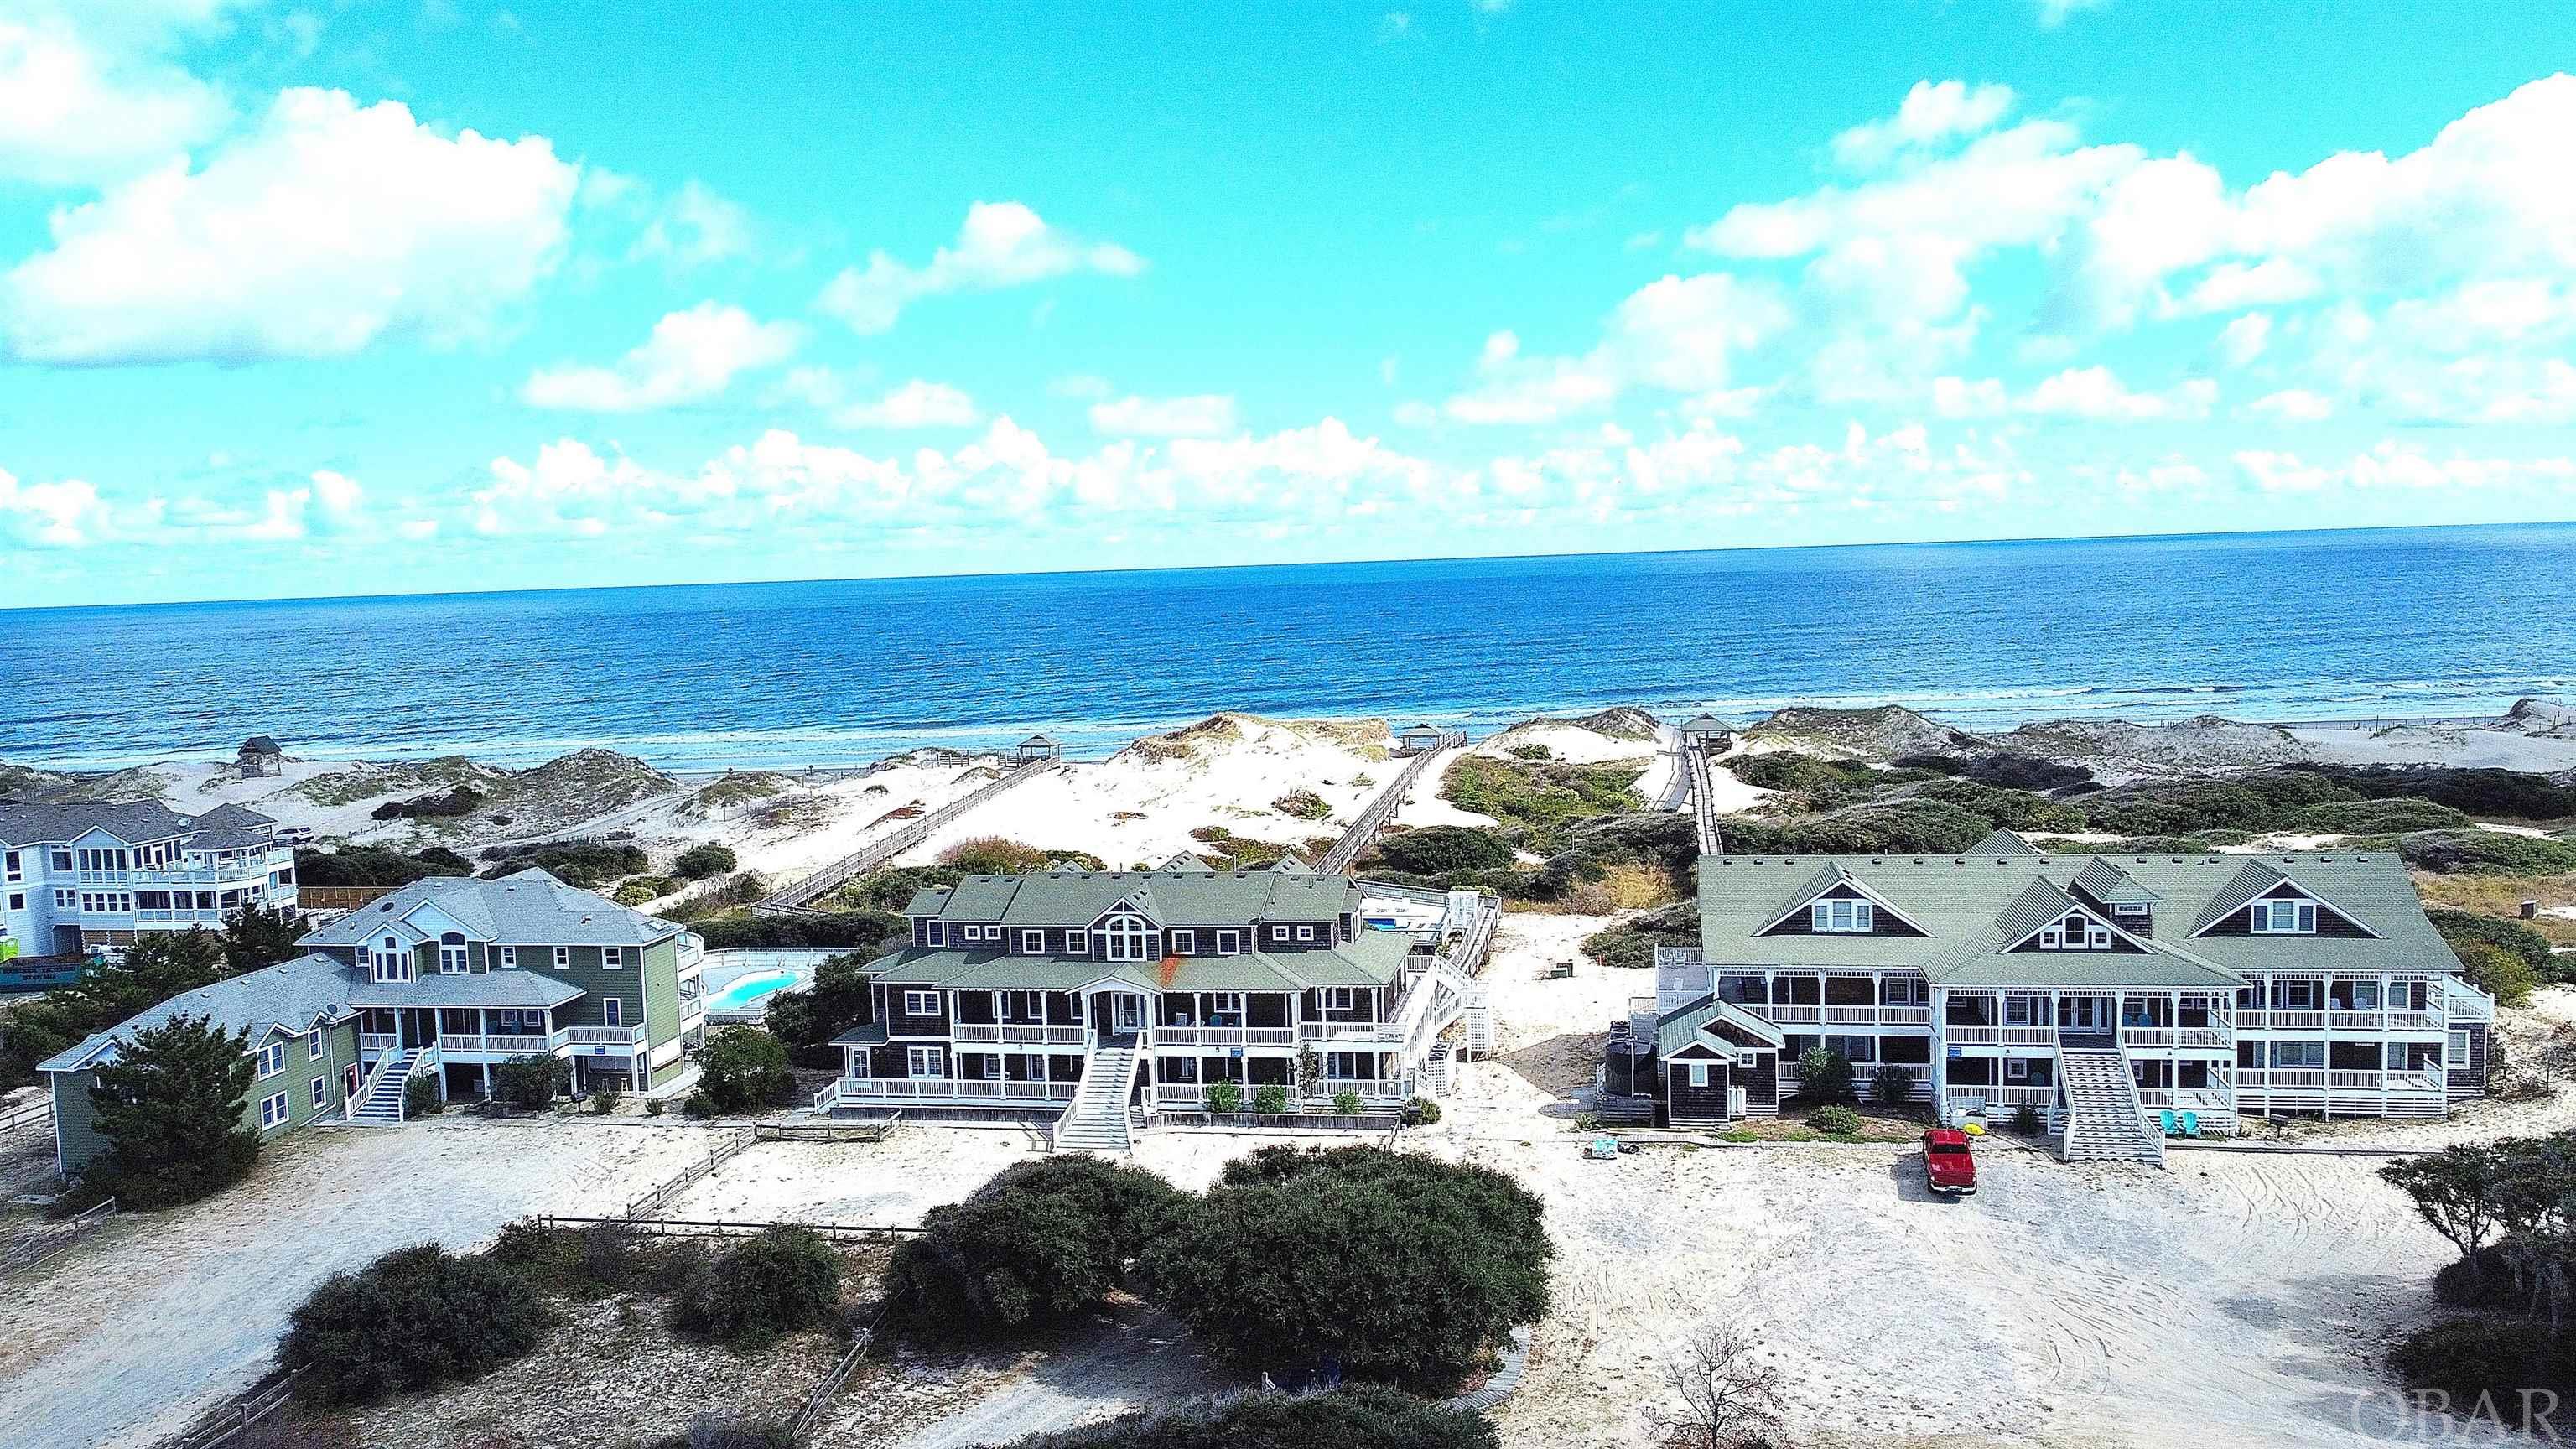 Looking for a picturesque beach estate that is a strong income producer? 2022 and 2023 rentals totaled $2,450,000. This sprawling oceanfront compound known as “The Three Authors” boasts 3 mansions with a total of 45 bedrooms, 37 baths, and 6 half baths. They are situated on over 10 acres of oceanfront property. The property is exquisite, unique, and unforgettable. There are multiple pool areas, gourmet kitchens, gaming areas, theatre rooms, elevators, and wet bars. You have Gigabit Fiber Optic Internet to keep you connected and a Reverse Osmosis Water treatment system for superior quality water.  These three magnificent homes can be used for a family get-together, corporate retreats, weddings, or a secluded getaway to the beach. These homes are quite spectacular with no shortage of luxe details. These properties have an excellent return on invest.  The “Three Authors” is located in the northern end of the Outer Banks on over 10 acres of oceanfront property. The northern section of the Outer Banks is undisturbed shorelines with no commercial development. There are no paved roads. You drive 2 miles on the beach past a North Carolina Coastal Reserve & National Estuarine Research Reserve to get to the properties. They have a private entrance crossing the dunes servicing all three homes. The peaceful and serene setting of these homes which are located in the 4-wheel drive area of the Outer Banks which is a favorite destination of visitors. This area consists of beaches, dunes, a wild horse sanctuary, maritime forests, and the ancestors of Colonial Spanish Mustangs are roaming free. Sit on one of the many decks enjoying a view of the ocean and watch the Spanish Mustangs roam throughout the property or watch the dolphins swim by in the ocean.  The homes in this luxurious retreat were named after Mark Twain, Ernest Hemingway, and F. Scott Fitzgerald.    1) Mark Twain - 18 bedrooms, 15 full and 2 half baths, almost 11,000 square feet, 3.64 acres, 2023 property taxes were $12,505.51. 2) Hemingway - 14 bedrooms, 13 full and 2 half baths, almost 8000 square feet, 3.57 acres, 2023 property taxes were $8,941.41. 3) Fitzgerald - 13 bedrooms, 9 full and 2 half baths, over 6000 square feet, 3.54 acres, 2023 property taxes were $7,695.42.